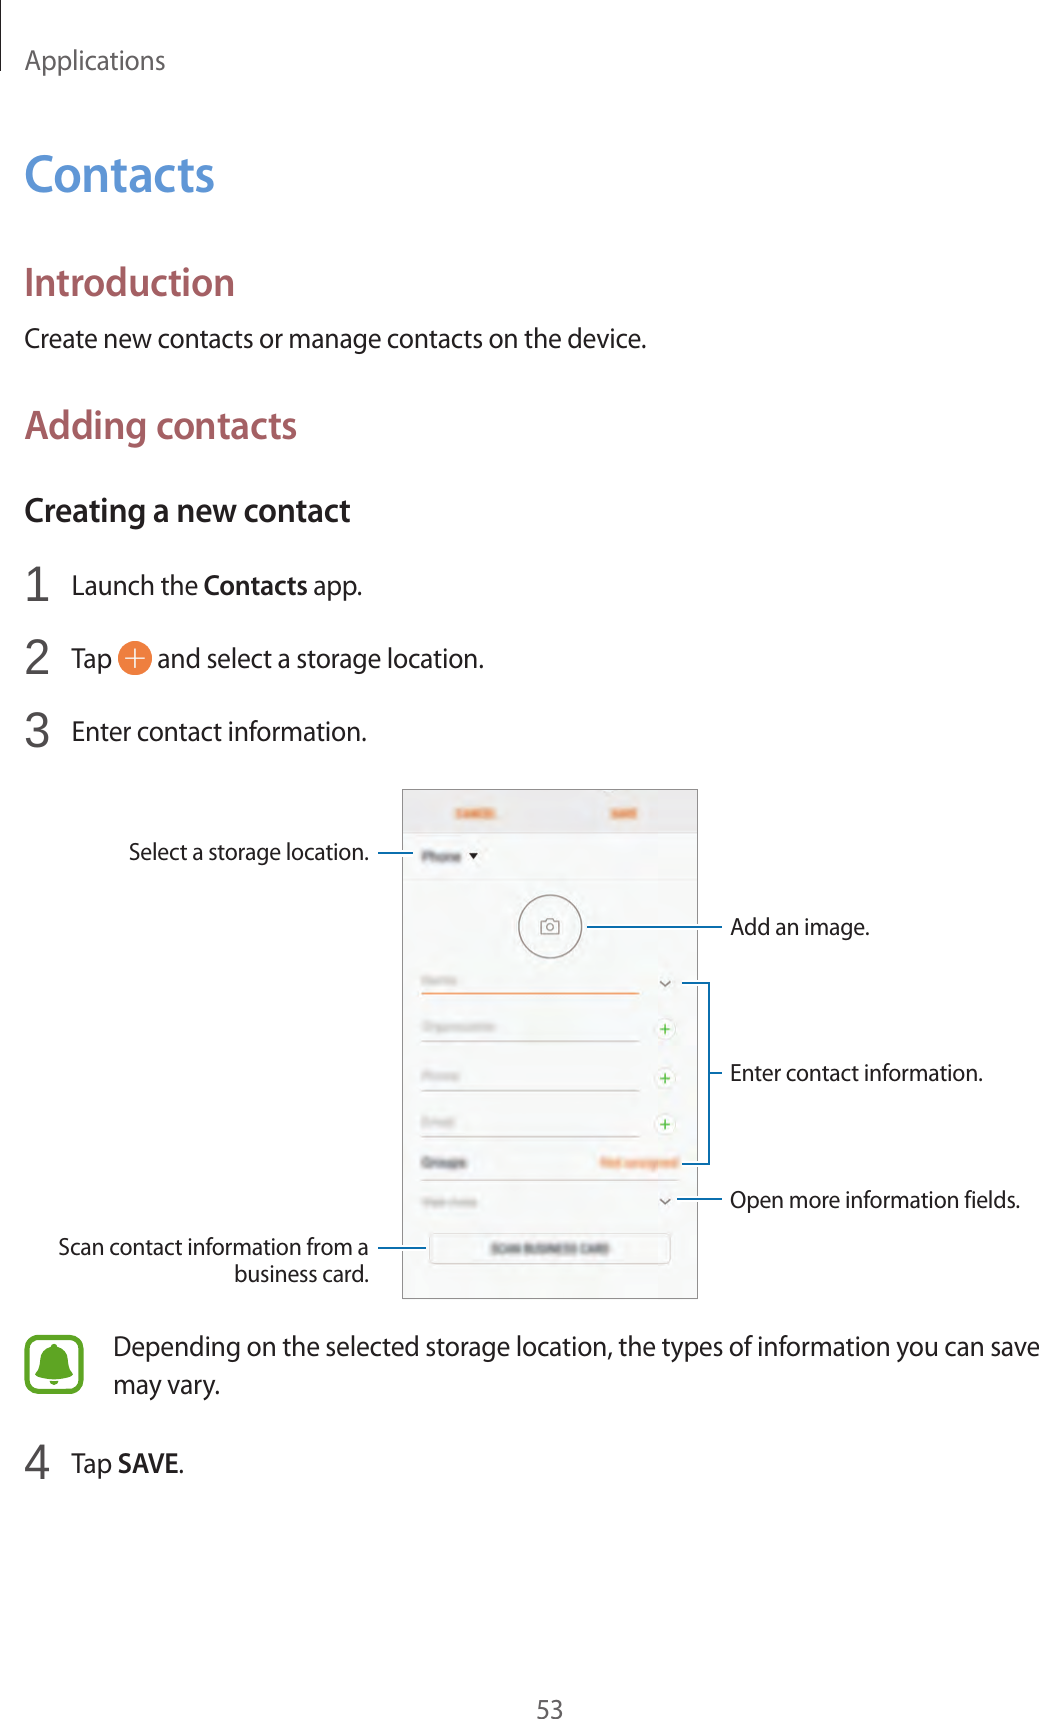 Applications53ContactsIntroductionCreate new contacts or manage contacts on the device.Adding contactsCreating a new contact1  Launch the Contacts app.2  Tap   and select a storage location.3  Enter contact information.Select a storage location.Add an image.Open more information fields.Scan contact information from a business card.Enter contact information.Depending on the selected storage location, the types of information you can save may vary.4  Tap SAVE.